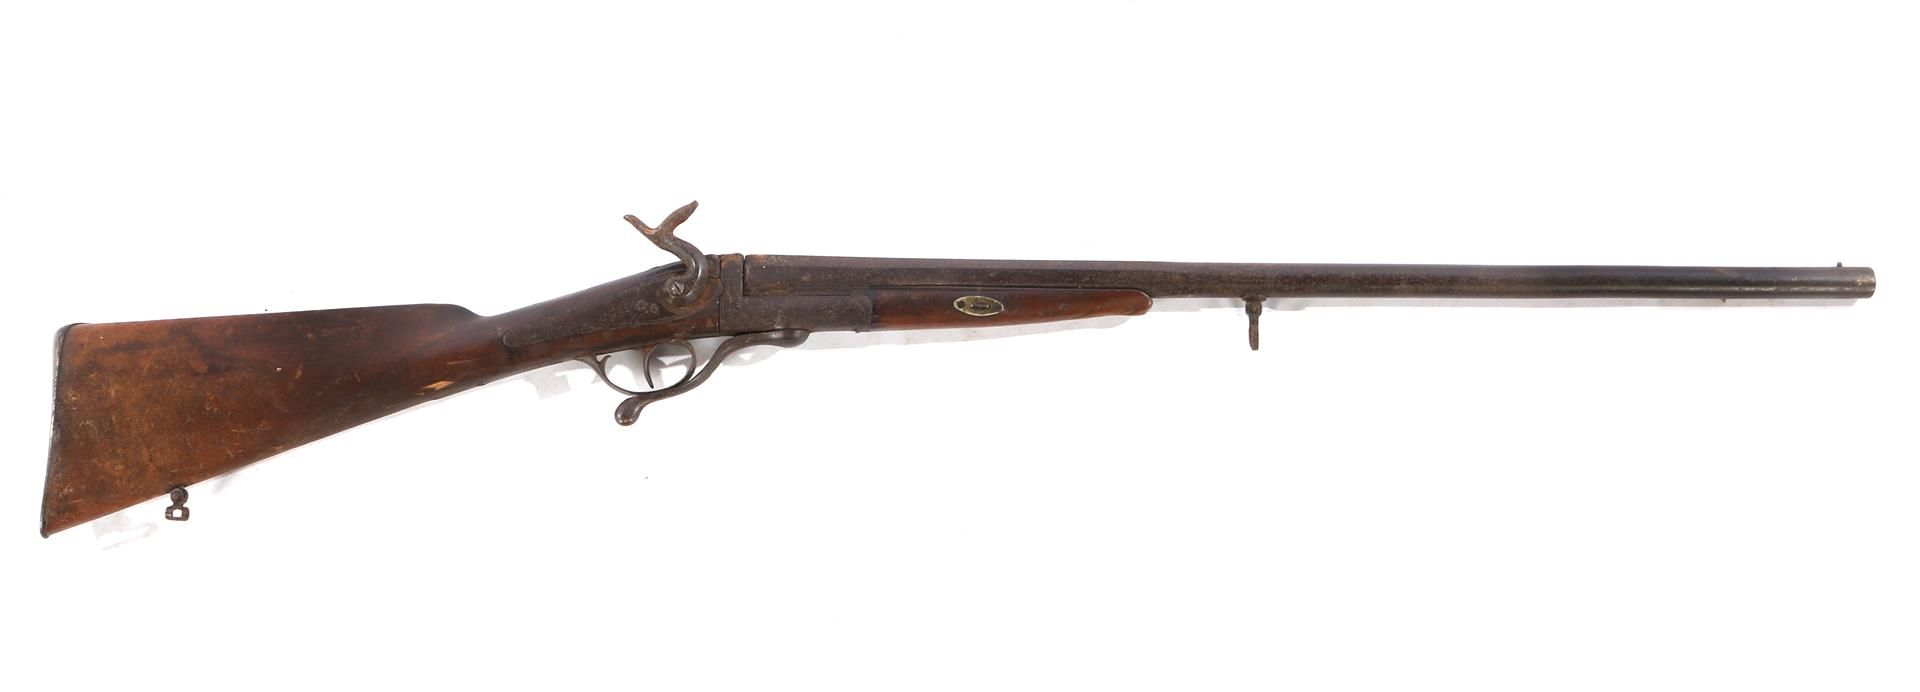 Antique single-barreled rifle with waffled wooden butt, pinfire approx. 1880, 100 cm long